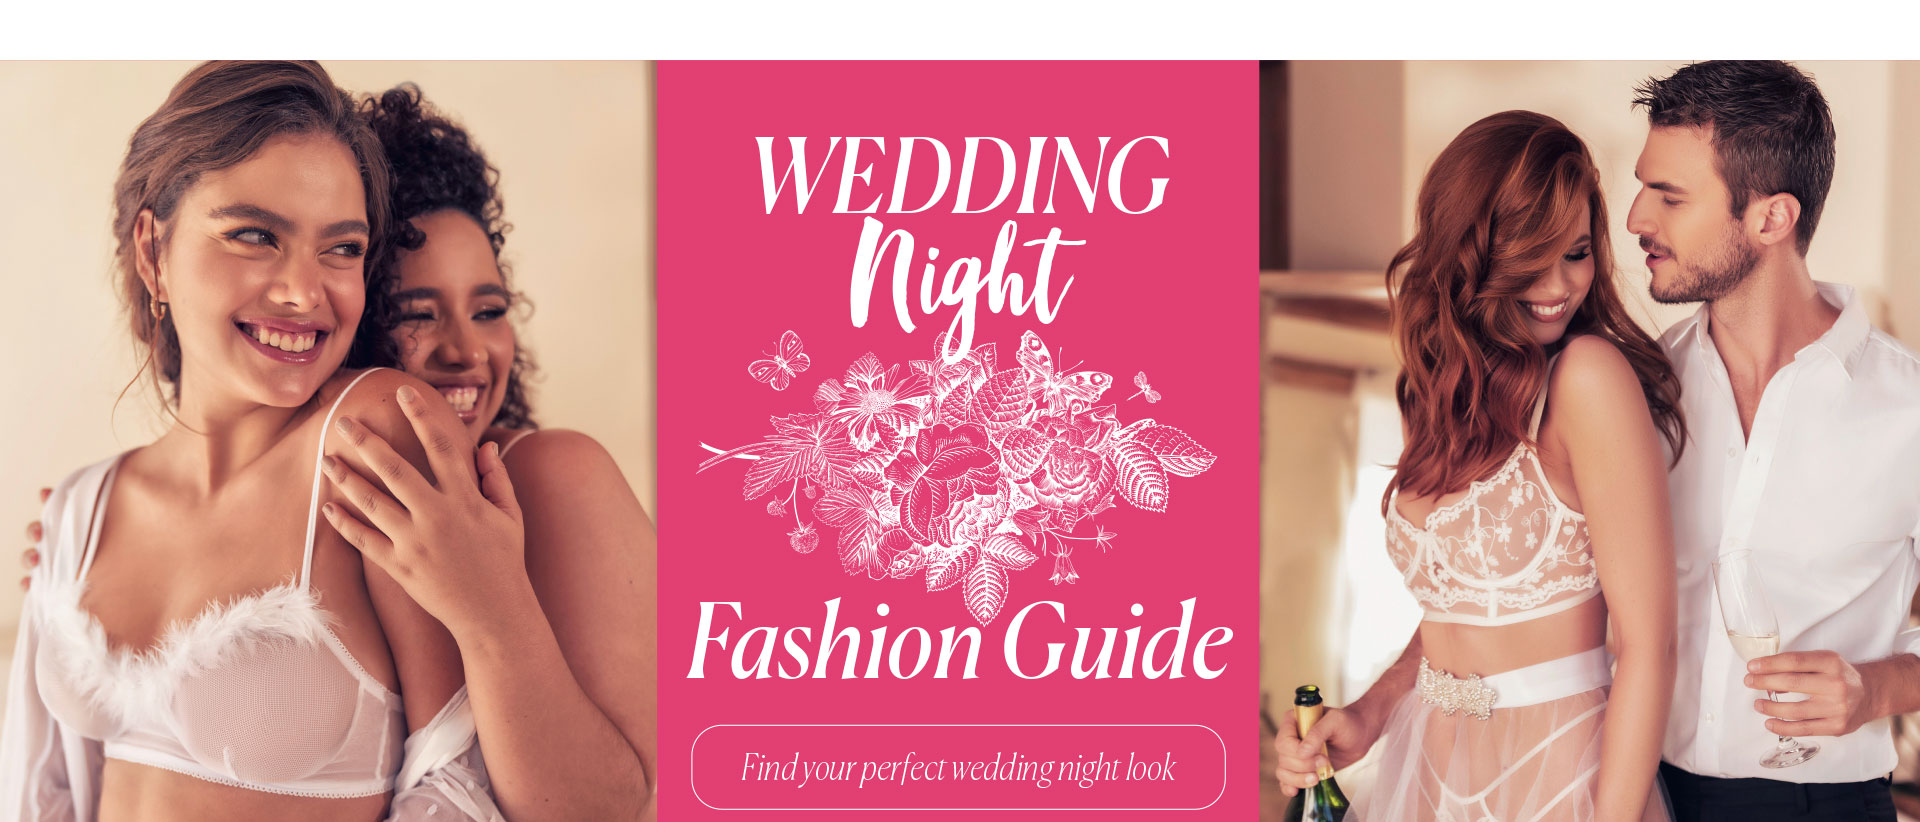 Wedding Night Fashion Guide - Find your perfect wedding night look